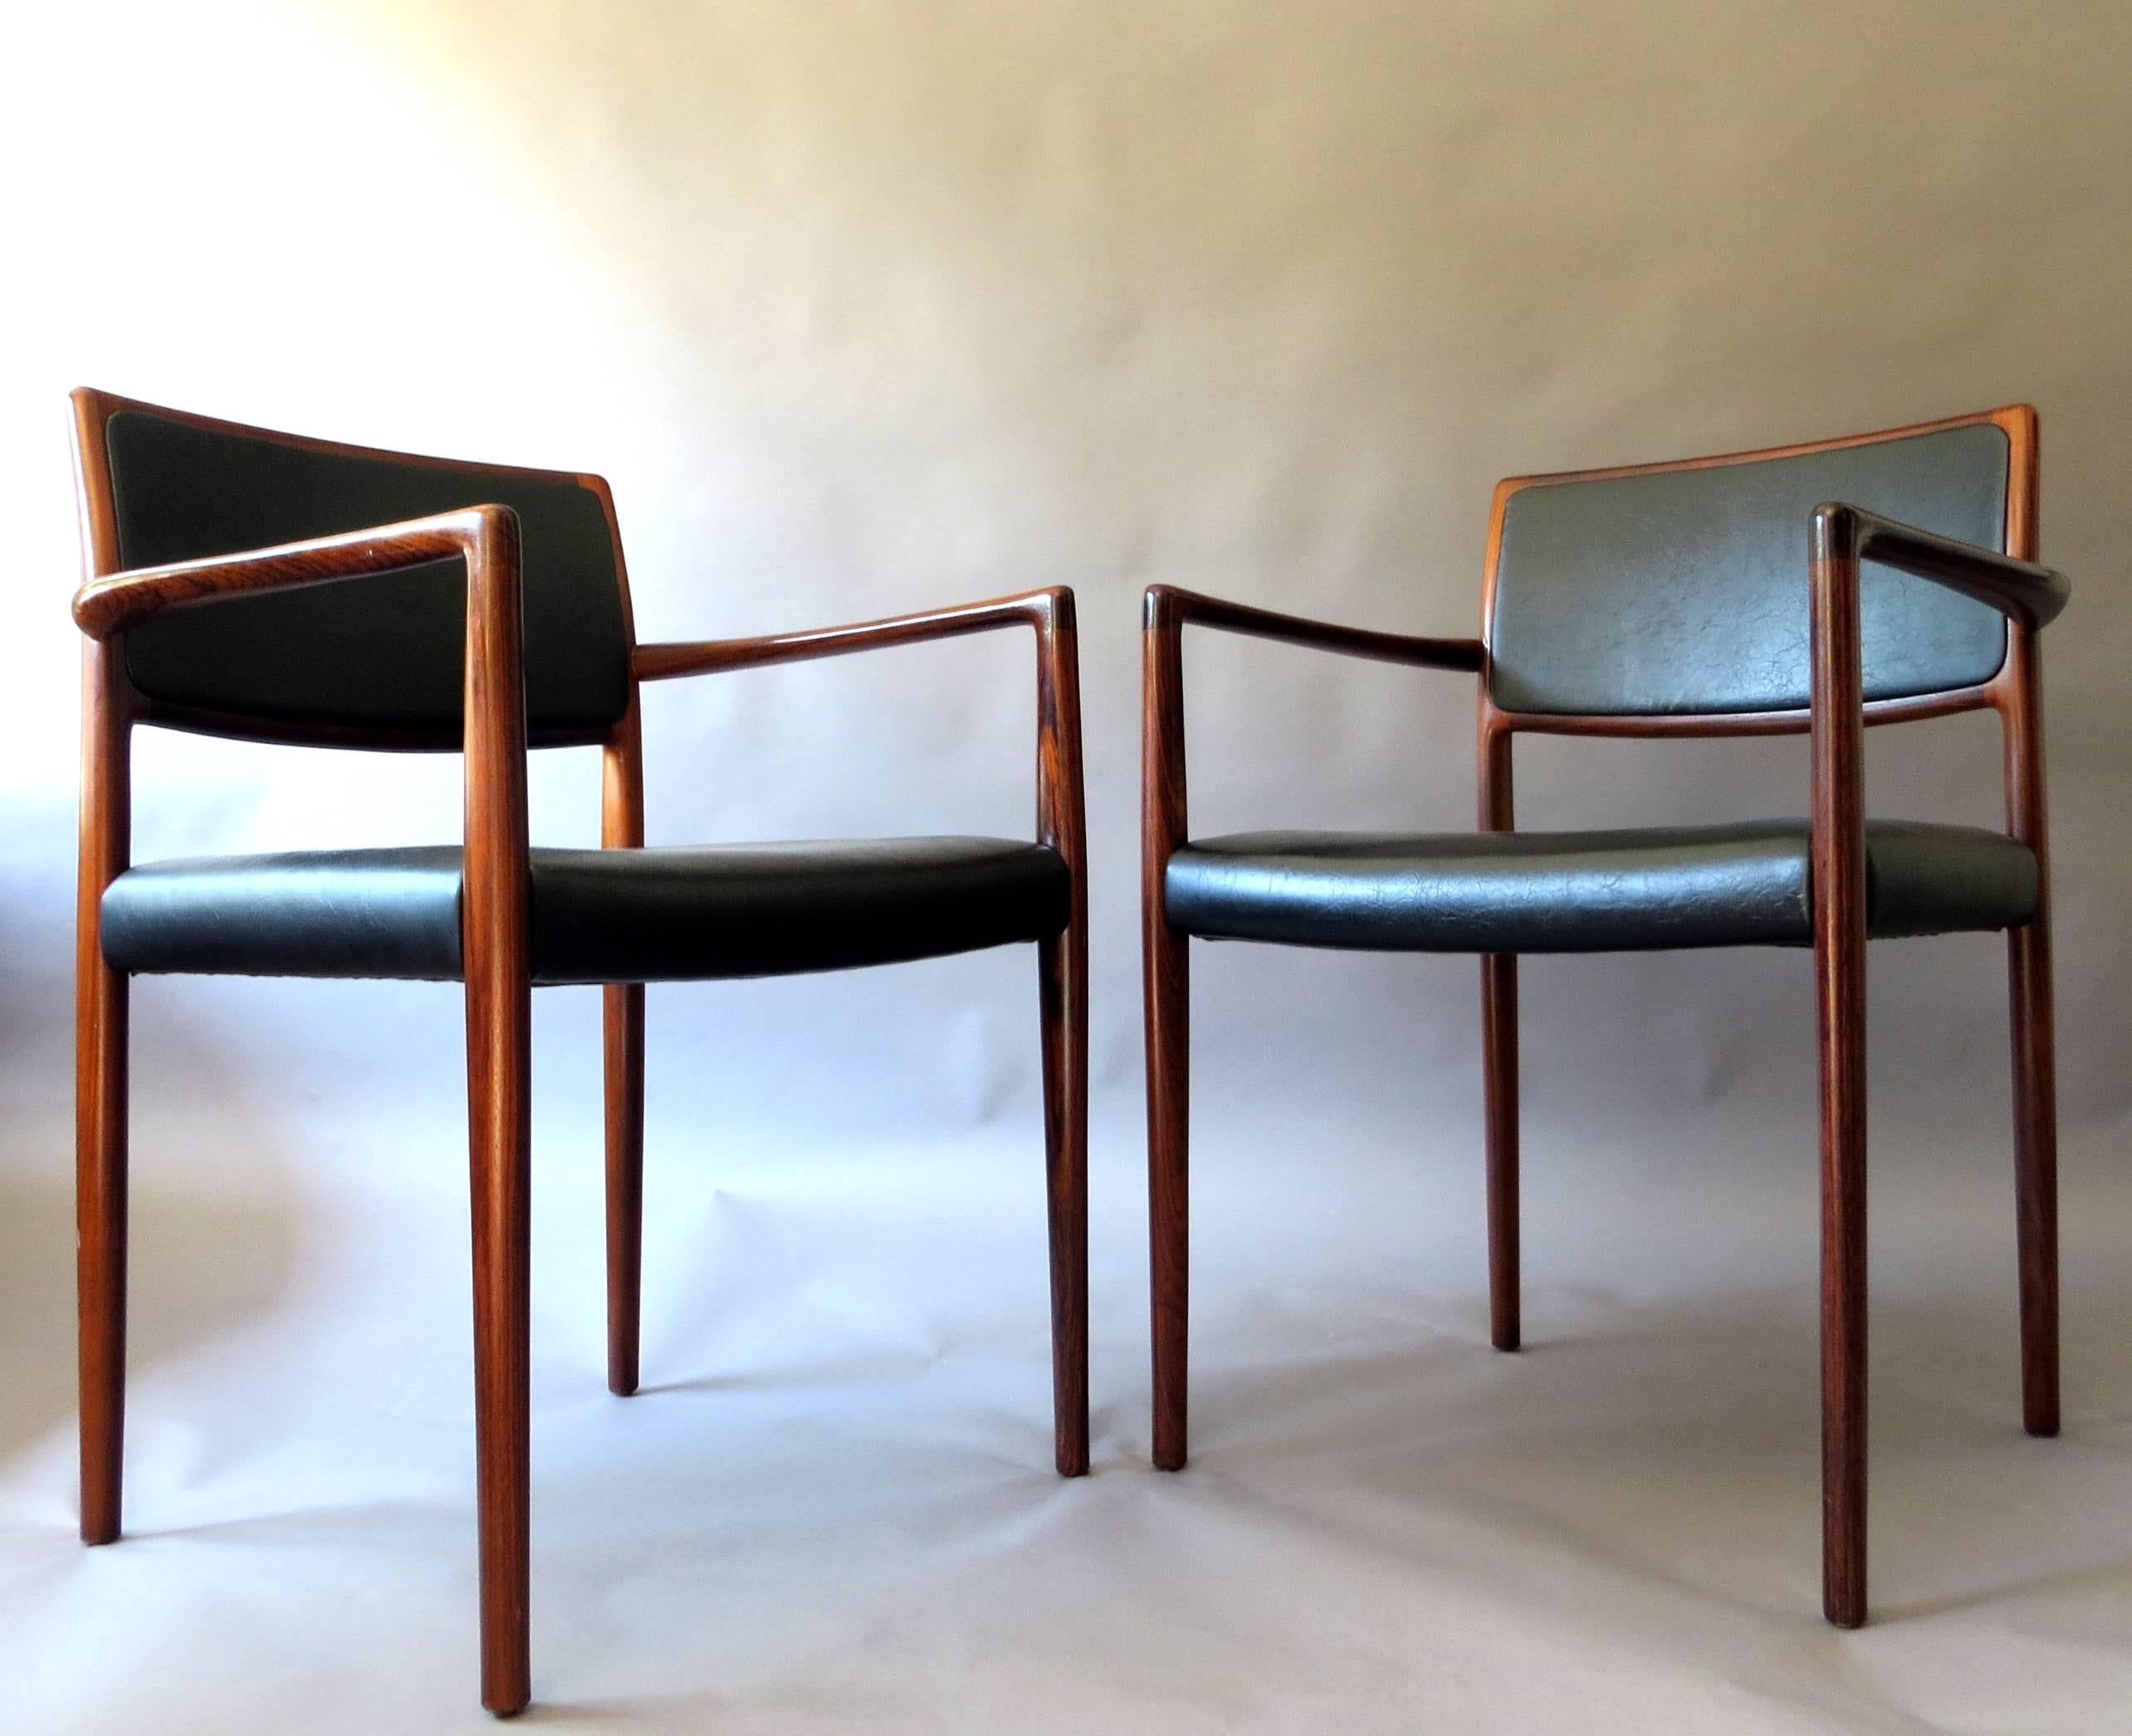 Finest Denmark Scandinavian vintage armchairs from the 1960s in highest quality and comfort. The design of these chairs are in style of the chairs from renowned cabinetmaker Niels Otto Möller.
The particularities are the organic sculptural shaped